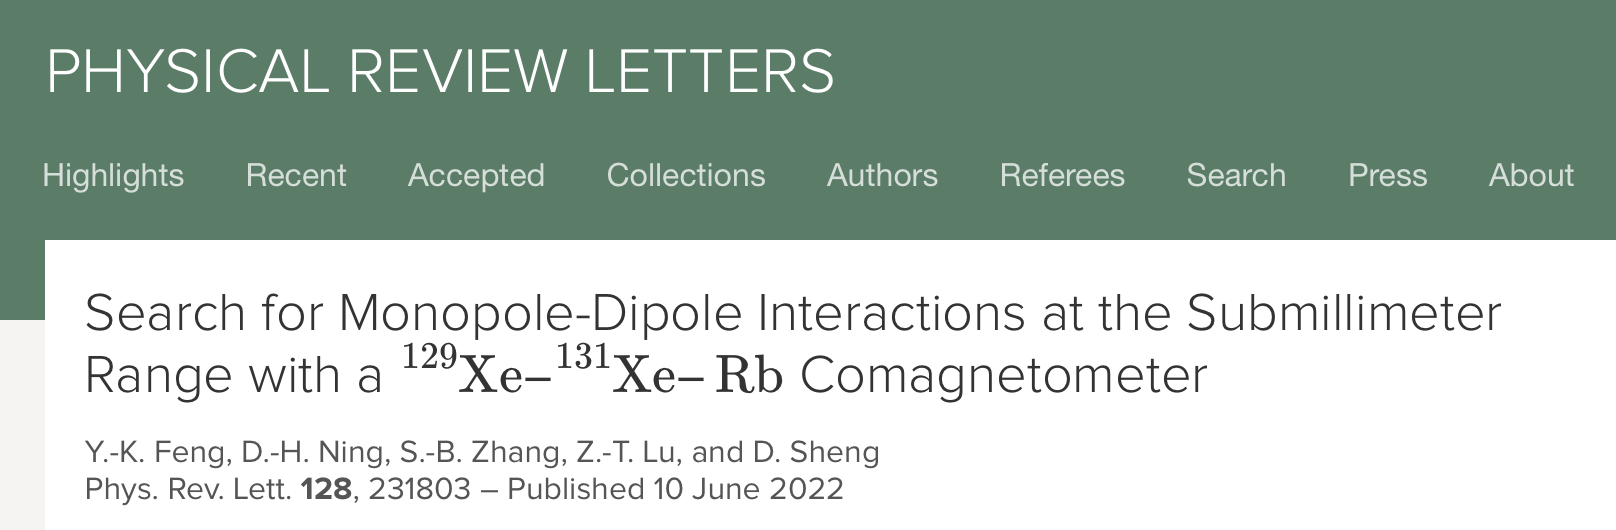 Image via Physical Review Letters